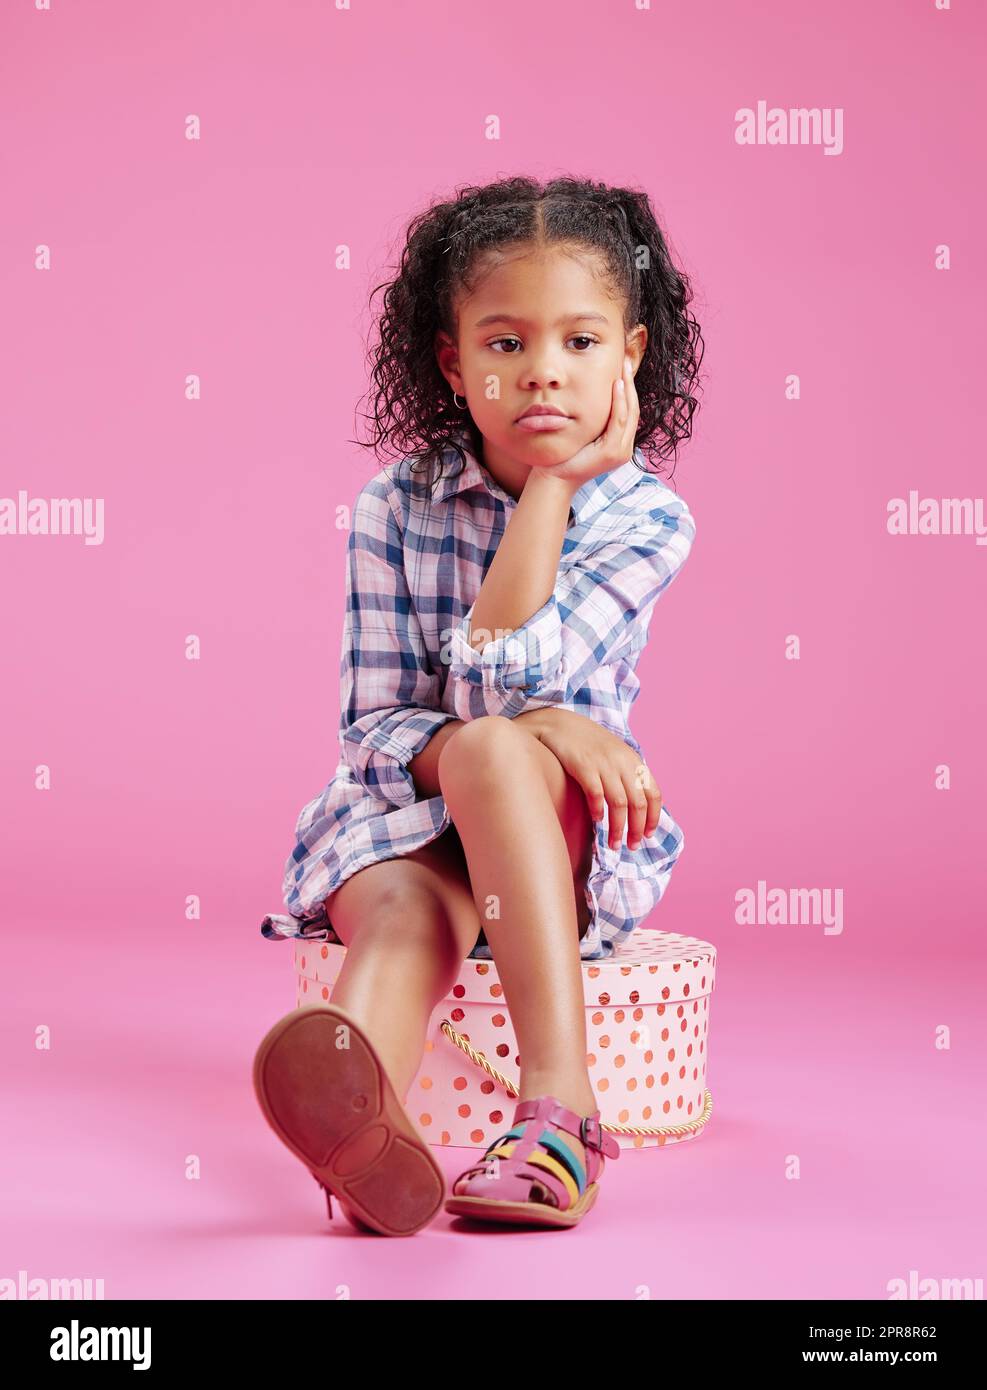 One cute little mixed race girl sitting in a studio and daydreaming against a pink copyspace background. A lonely African American child looking sad and depressed Stock Photo